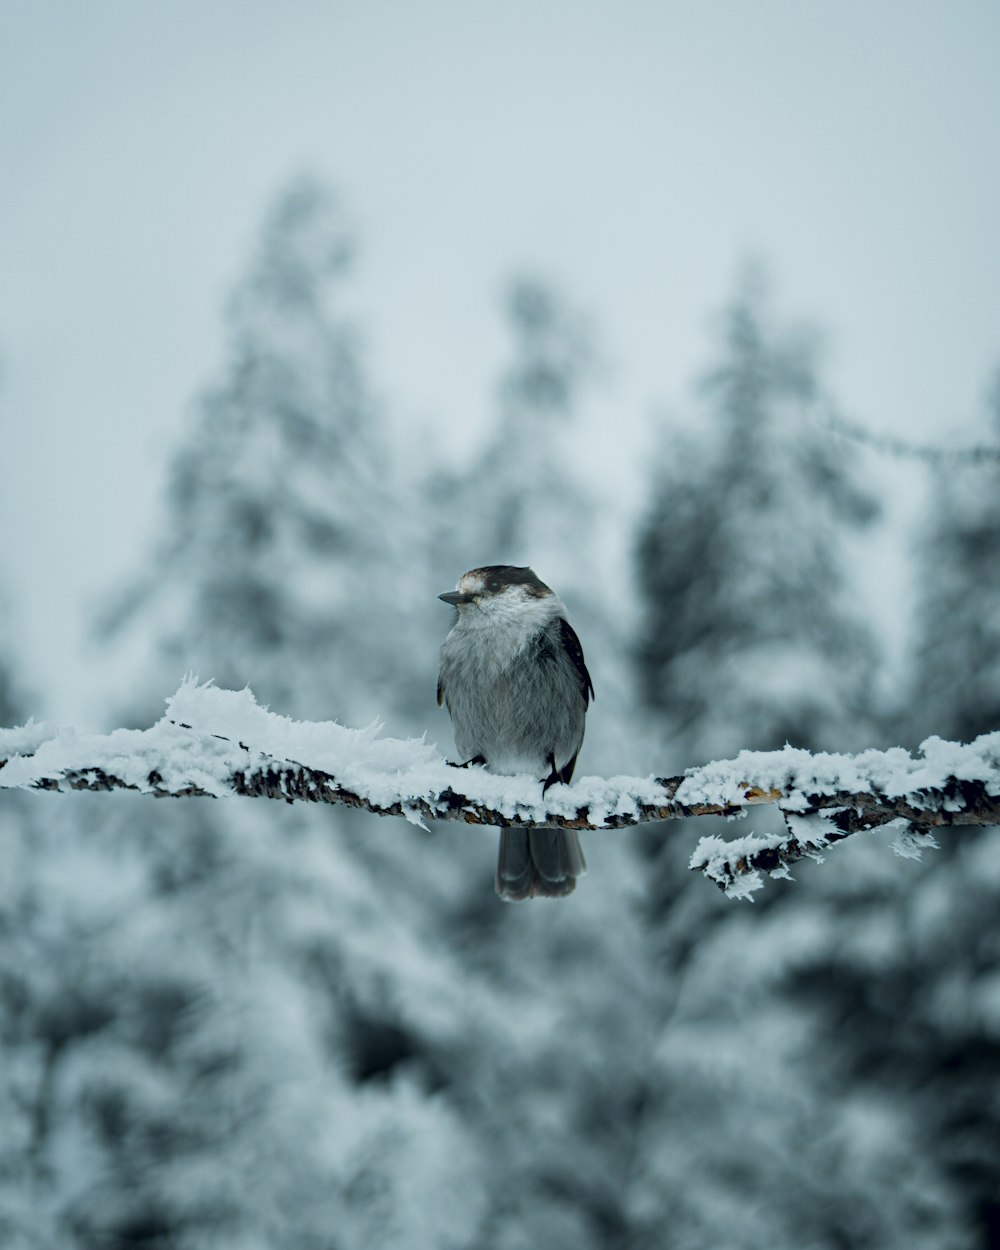 white and gray bird on brown tree branch